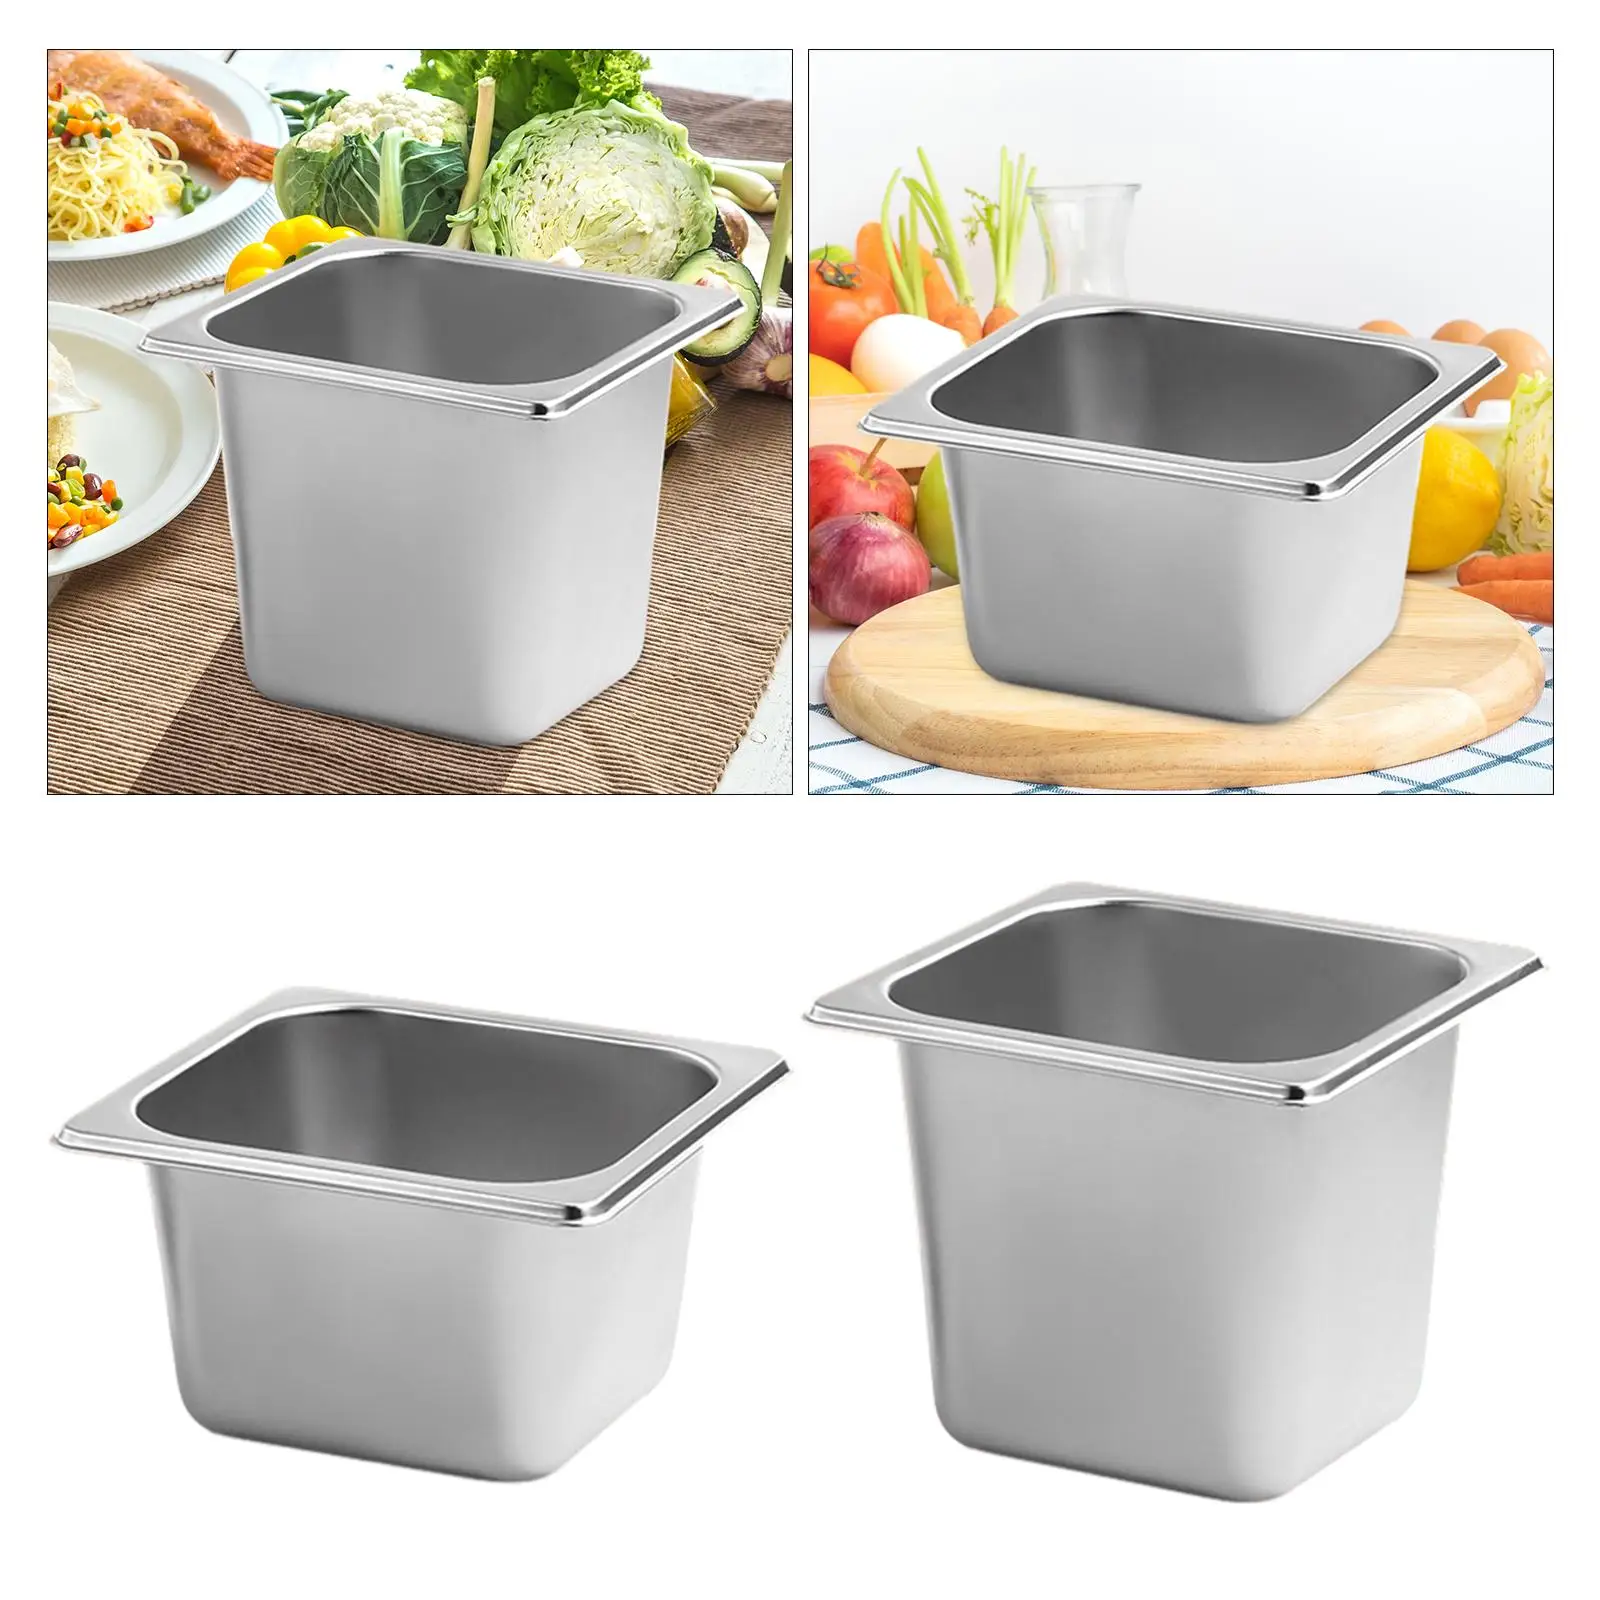 Catering Food Pan Stainless Steel Oven Tray for Preparing Bread Crumb Dish